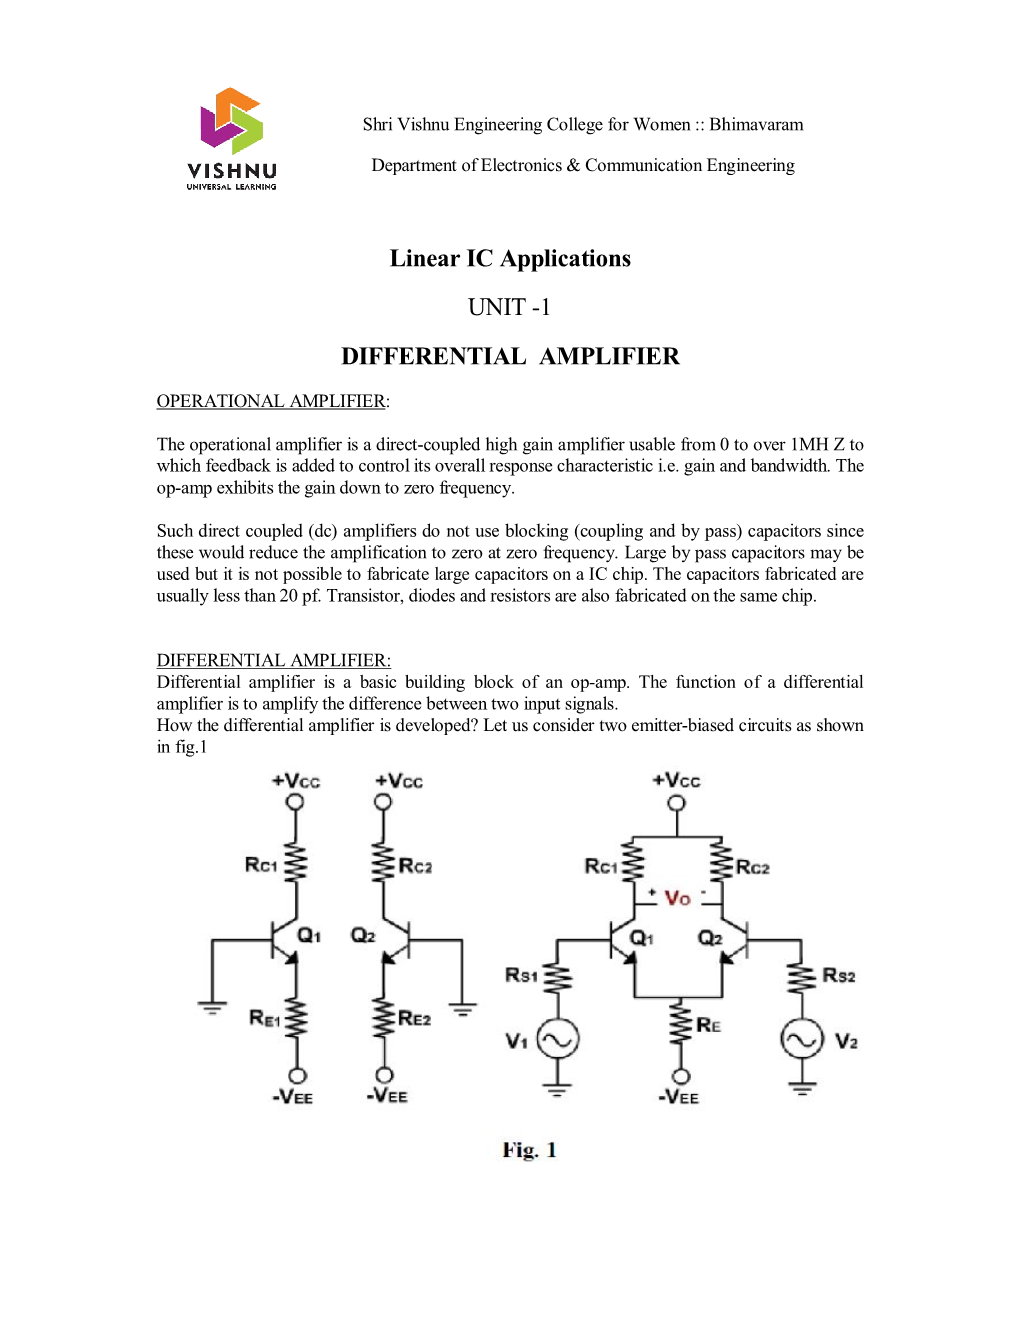 Linear IC Applications UNIT -1 DIFFERENTIAL AMPLIFIER